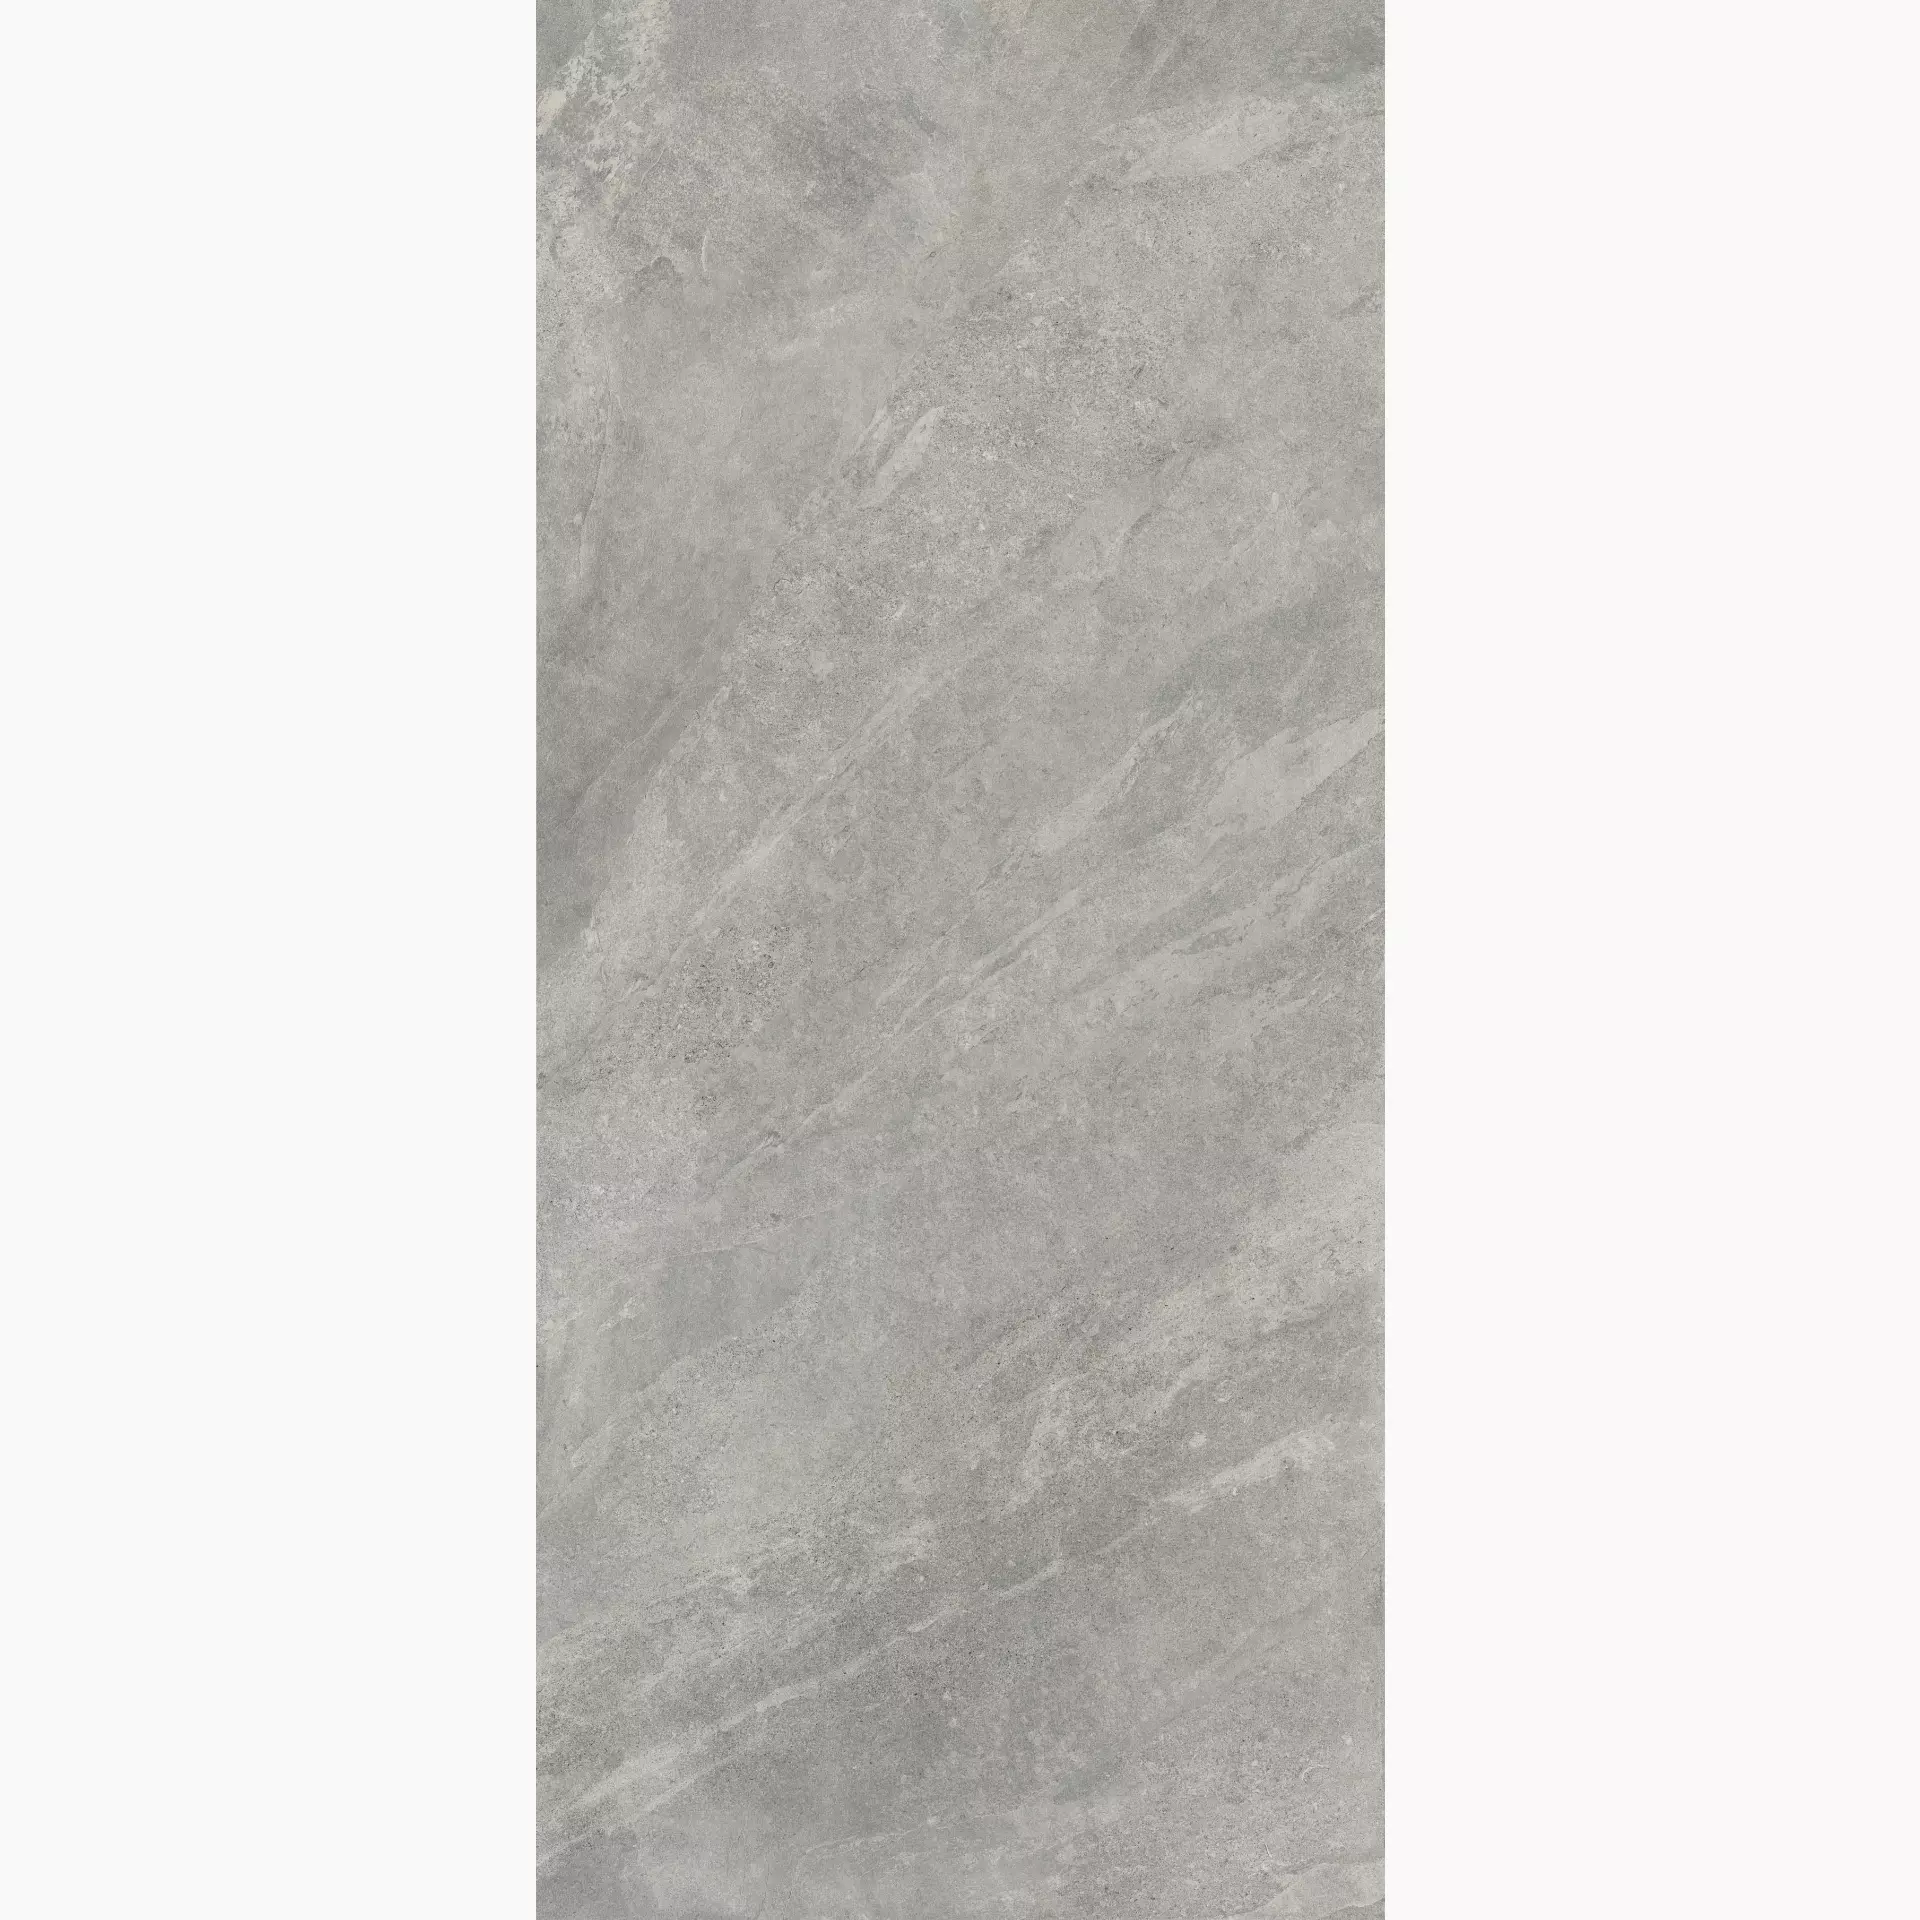 ABK Monolith Greige Naturale PF60008799 120x280cm rectified 6mm